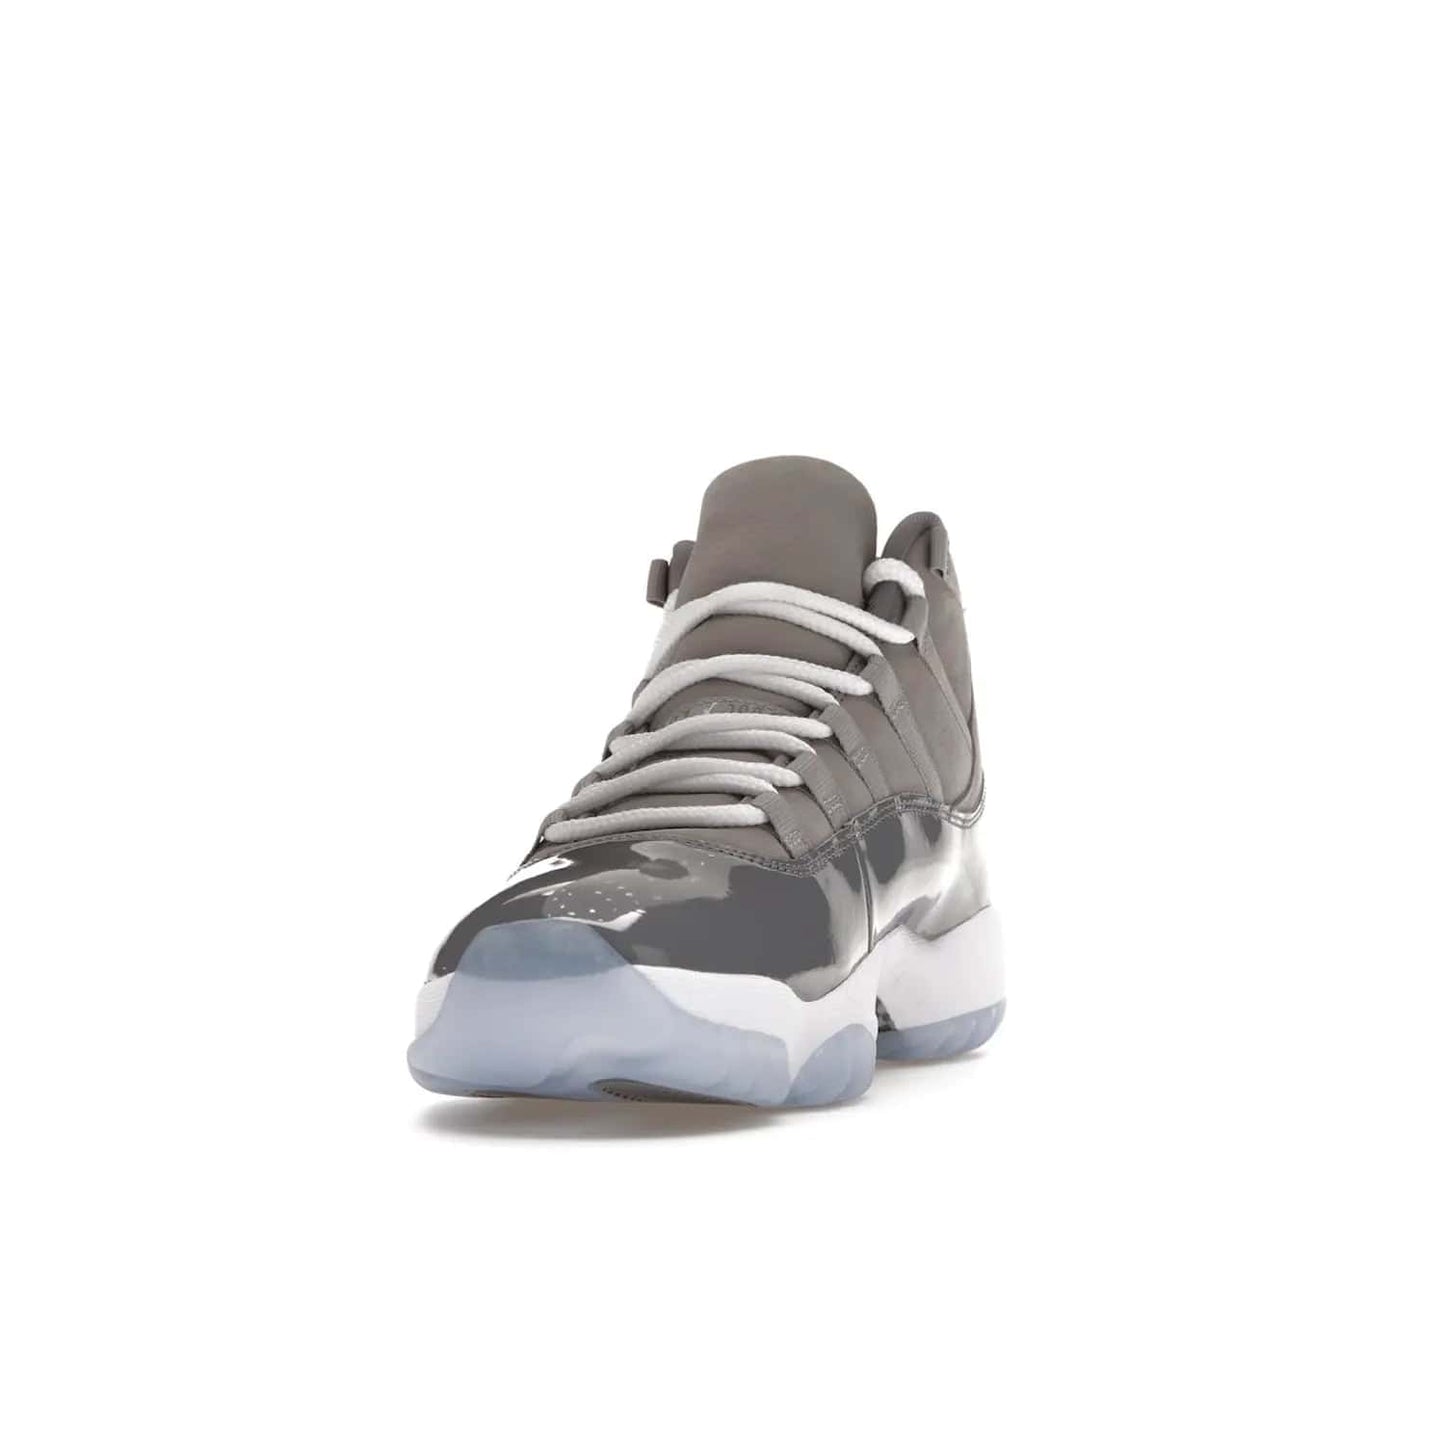 Jordan 11 Retro Cool Grey (2021) - Image 12 - Only at www.BallersClubKickz.com - Shop the Air Jordan 11 Retro Cool Grey (2021) for a must-have sneaker with a Cool Grey Durabuck upper, patent leather overlays, signature Jumpman embroidery, a white midsole, icy blue translucent outsole, and Multi-Color accents.  Released in December 2021 for $225.